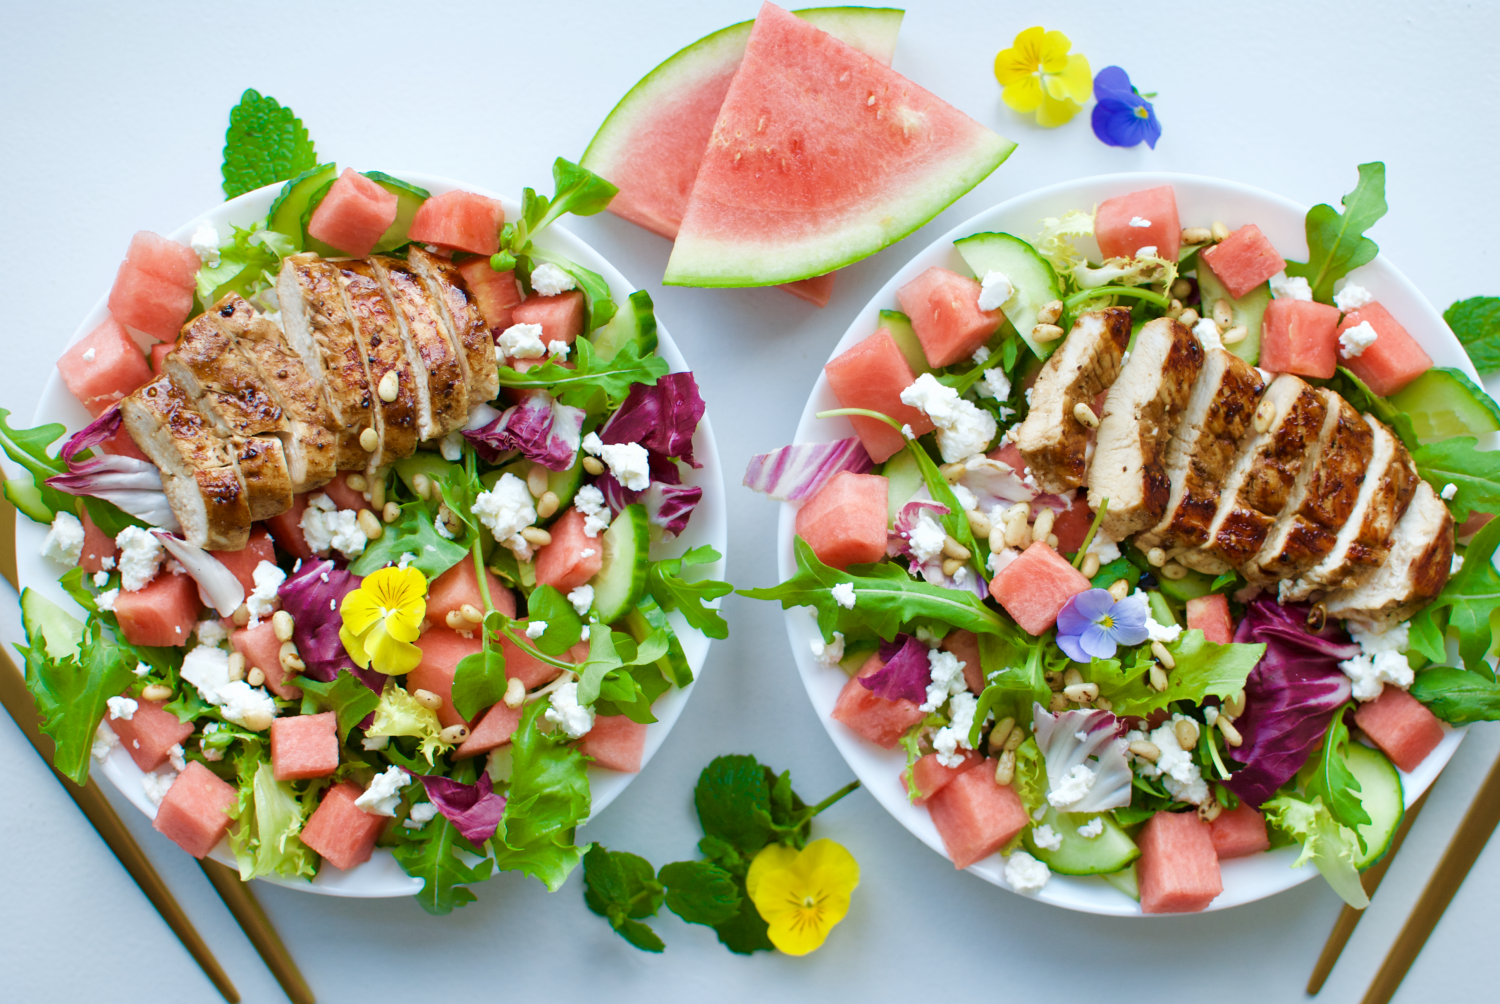 My favorite summery salad with watermelon, juicy balsamic glazed chicken, feta cheese and much more